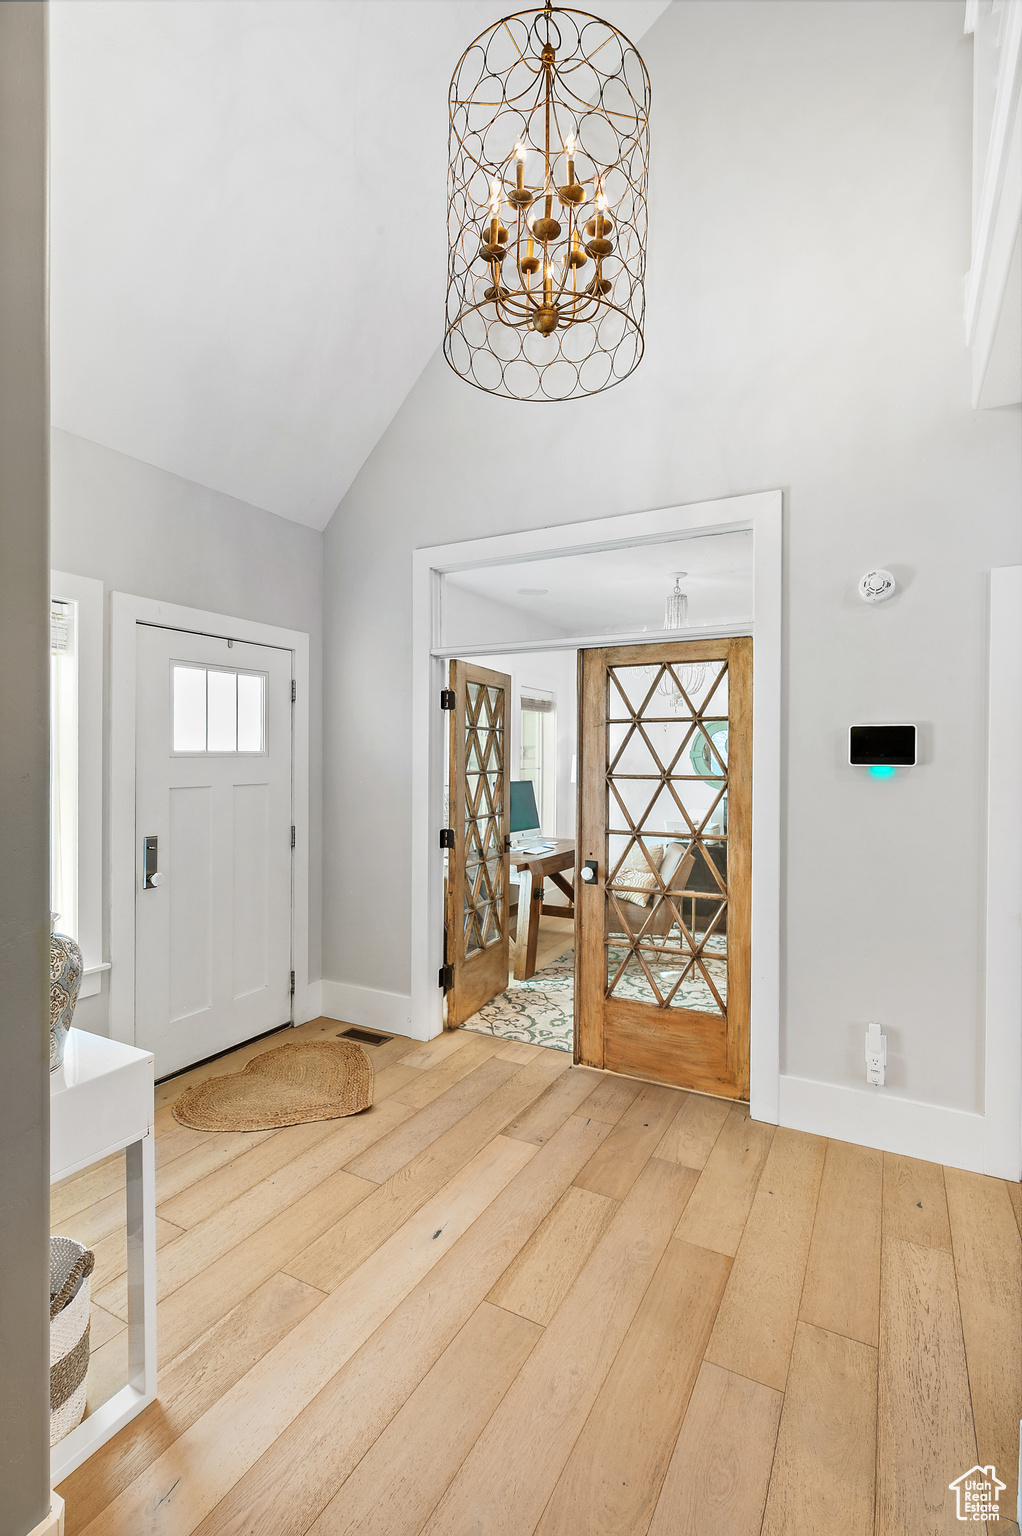 Entryway with an inviting chandelier, vaulted ceiling, and light hardwood flooring